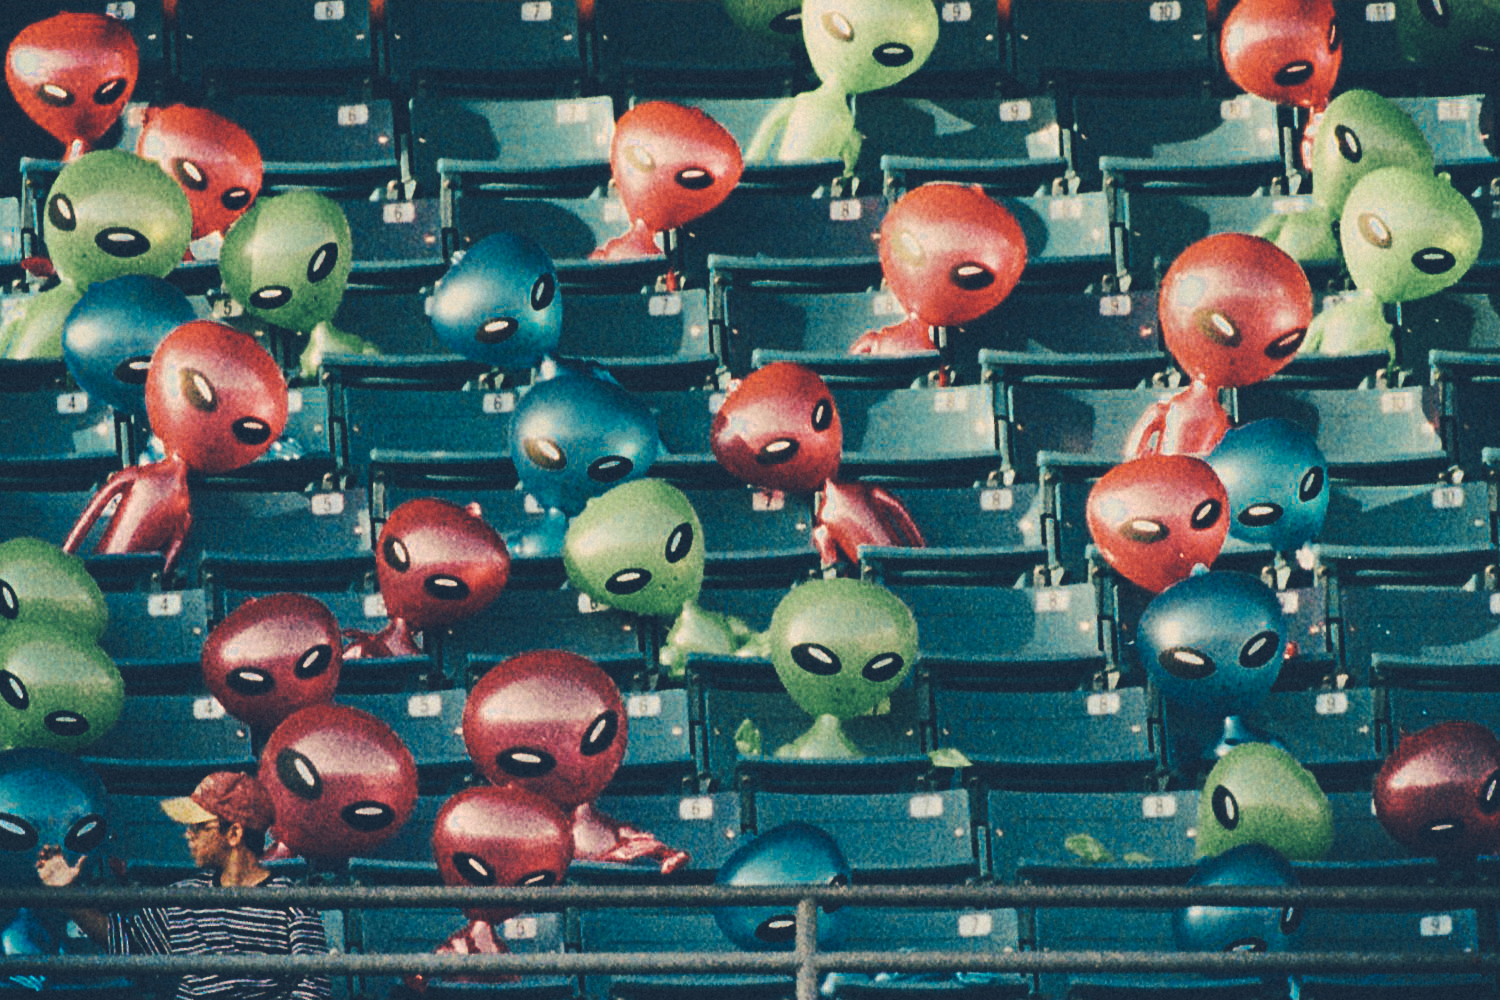 Aliens in the stands at LoanDepot Park